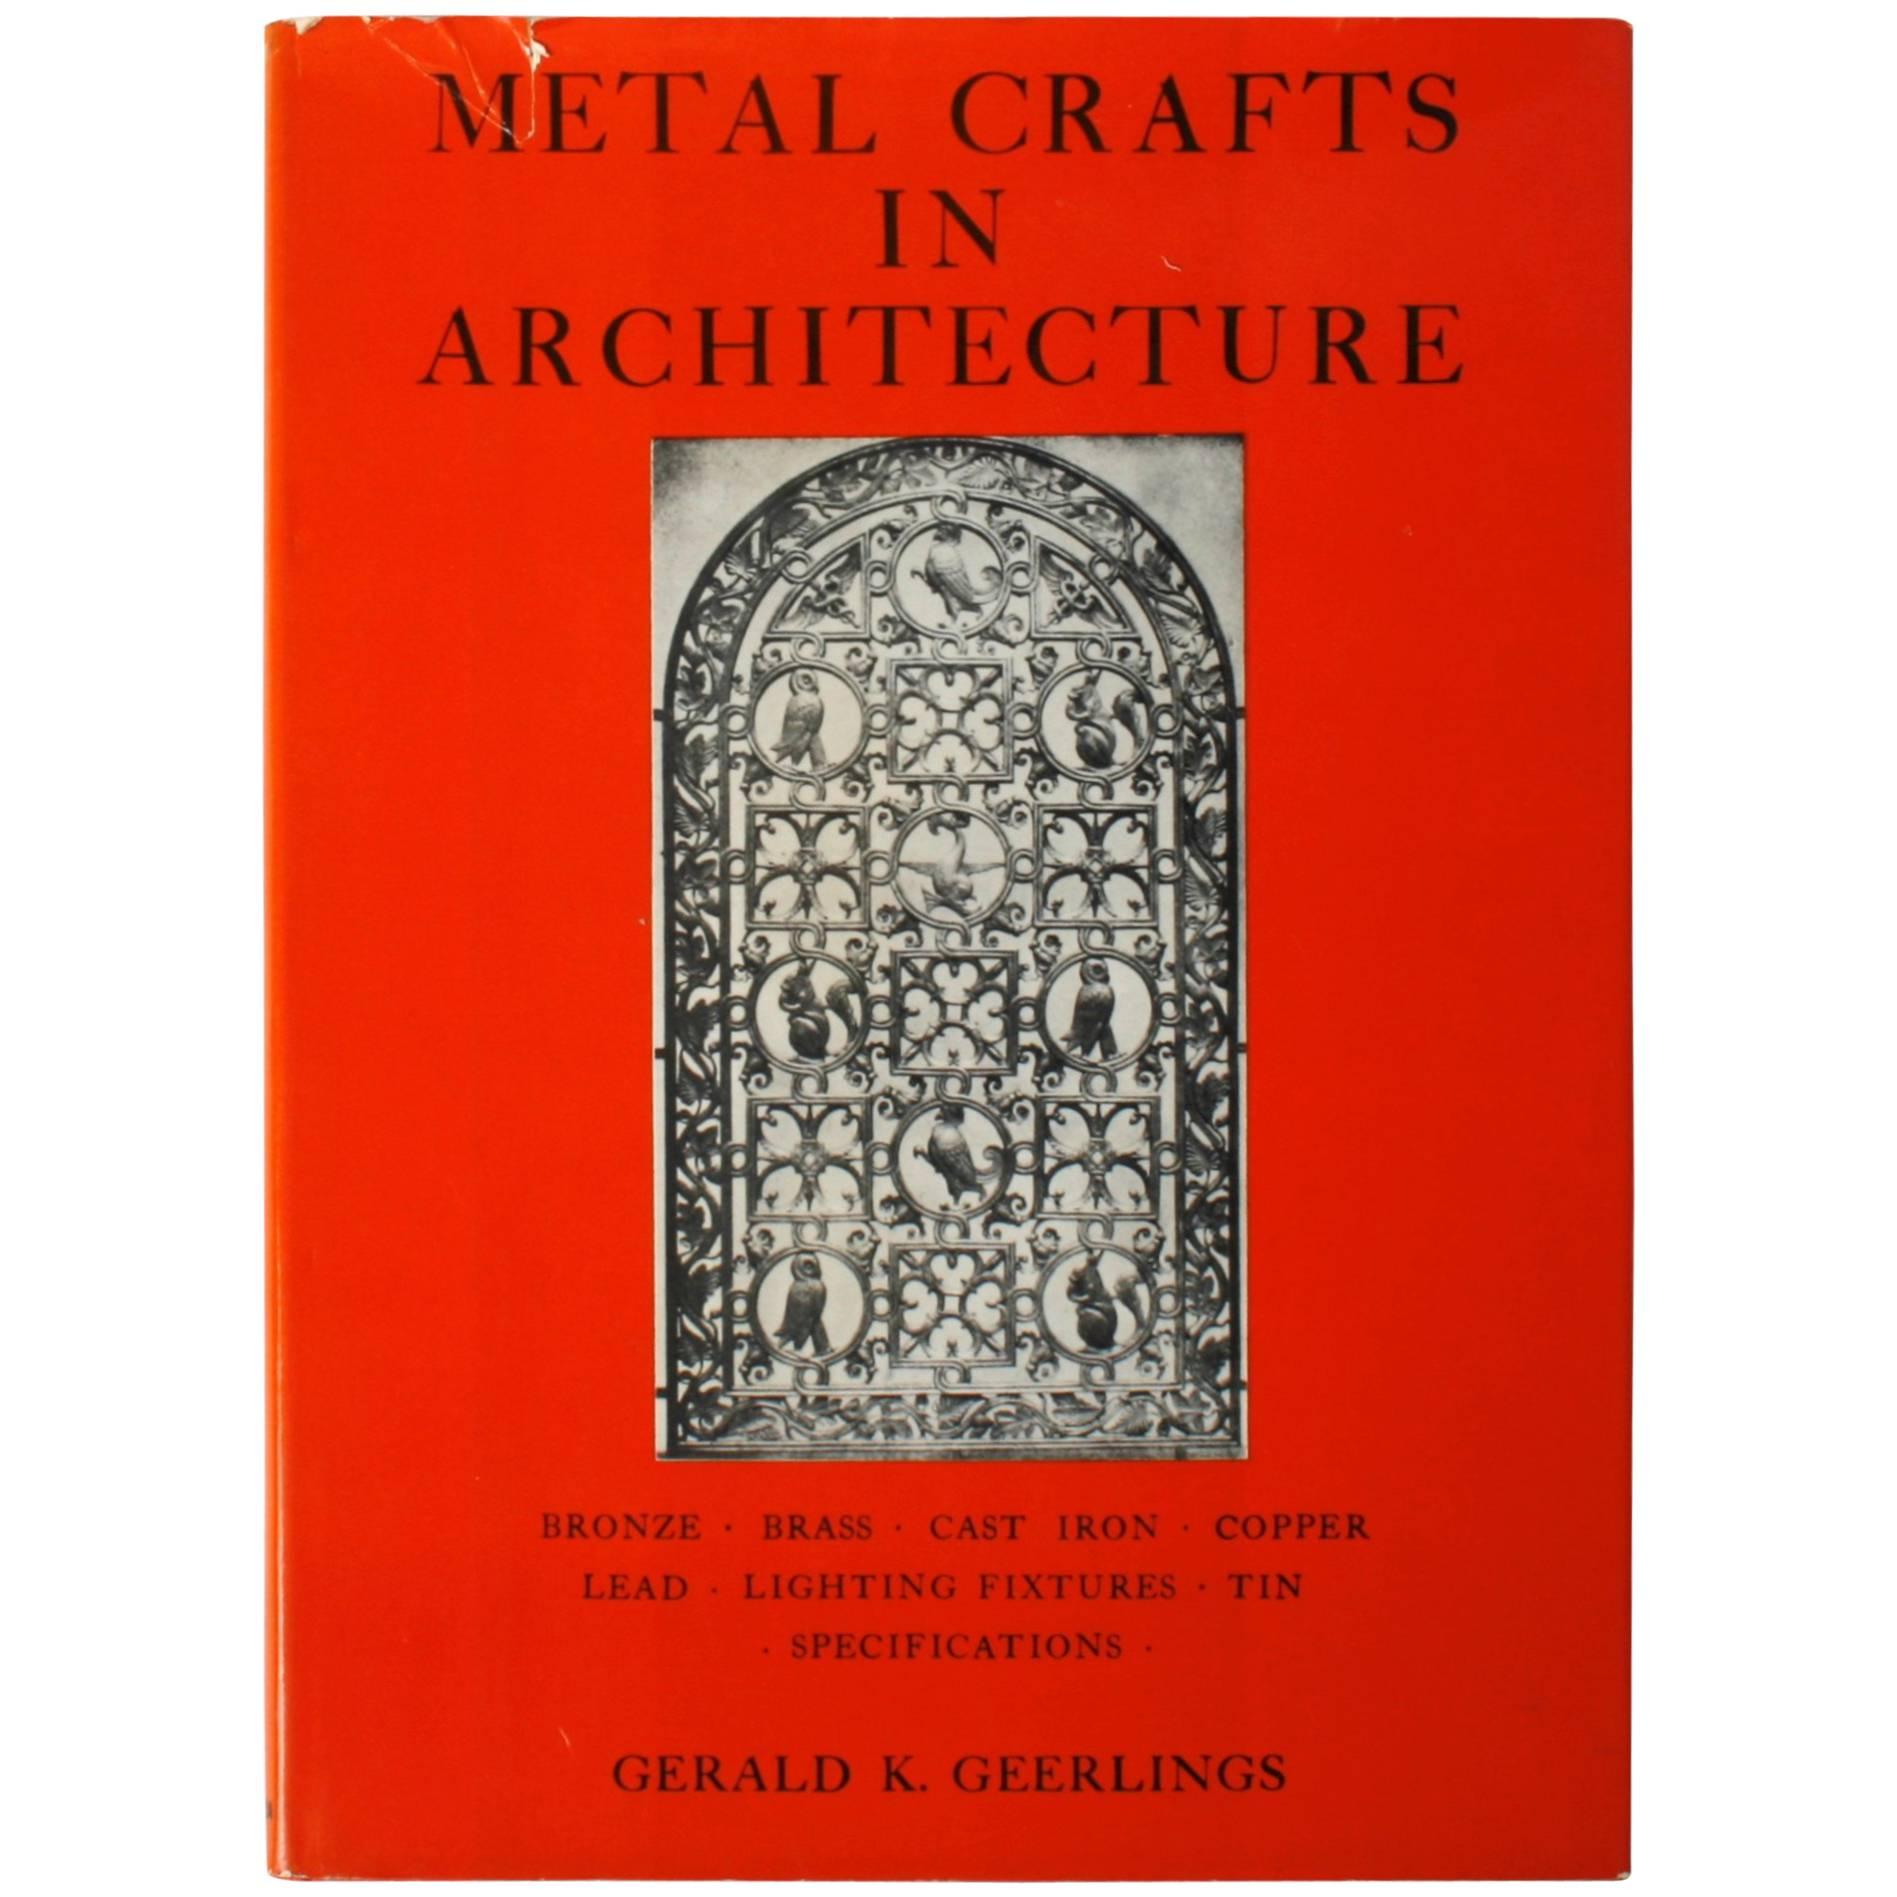 Metal Crafts in Architecture by Gerald K. Geerlings, First Edition